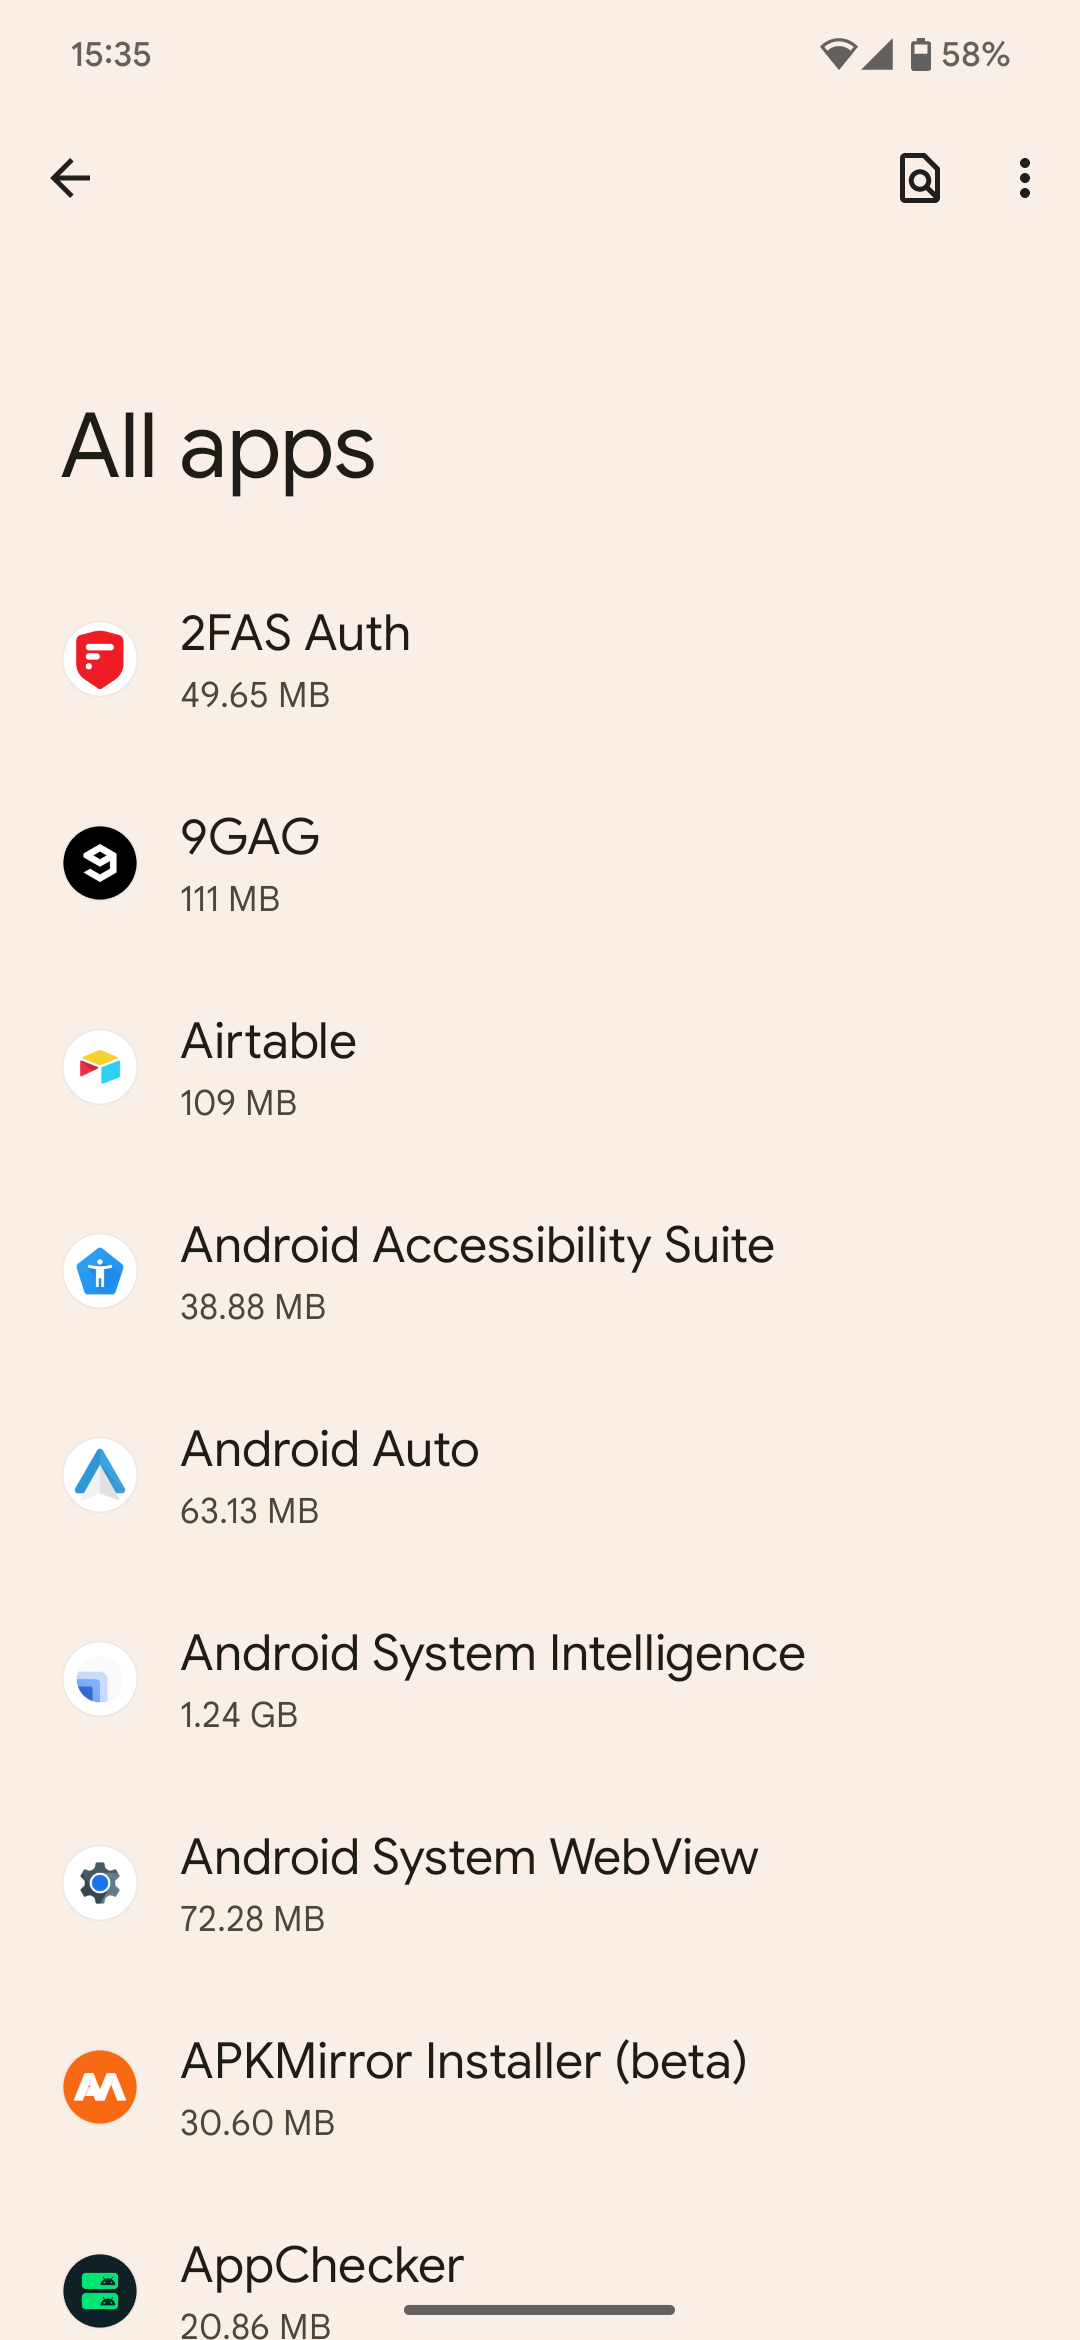 Screenshot of All apps section in Android 13's system settings